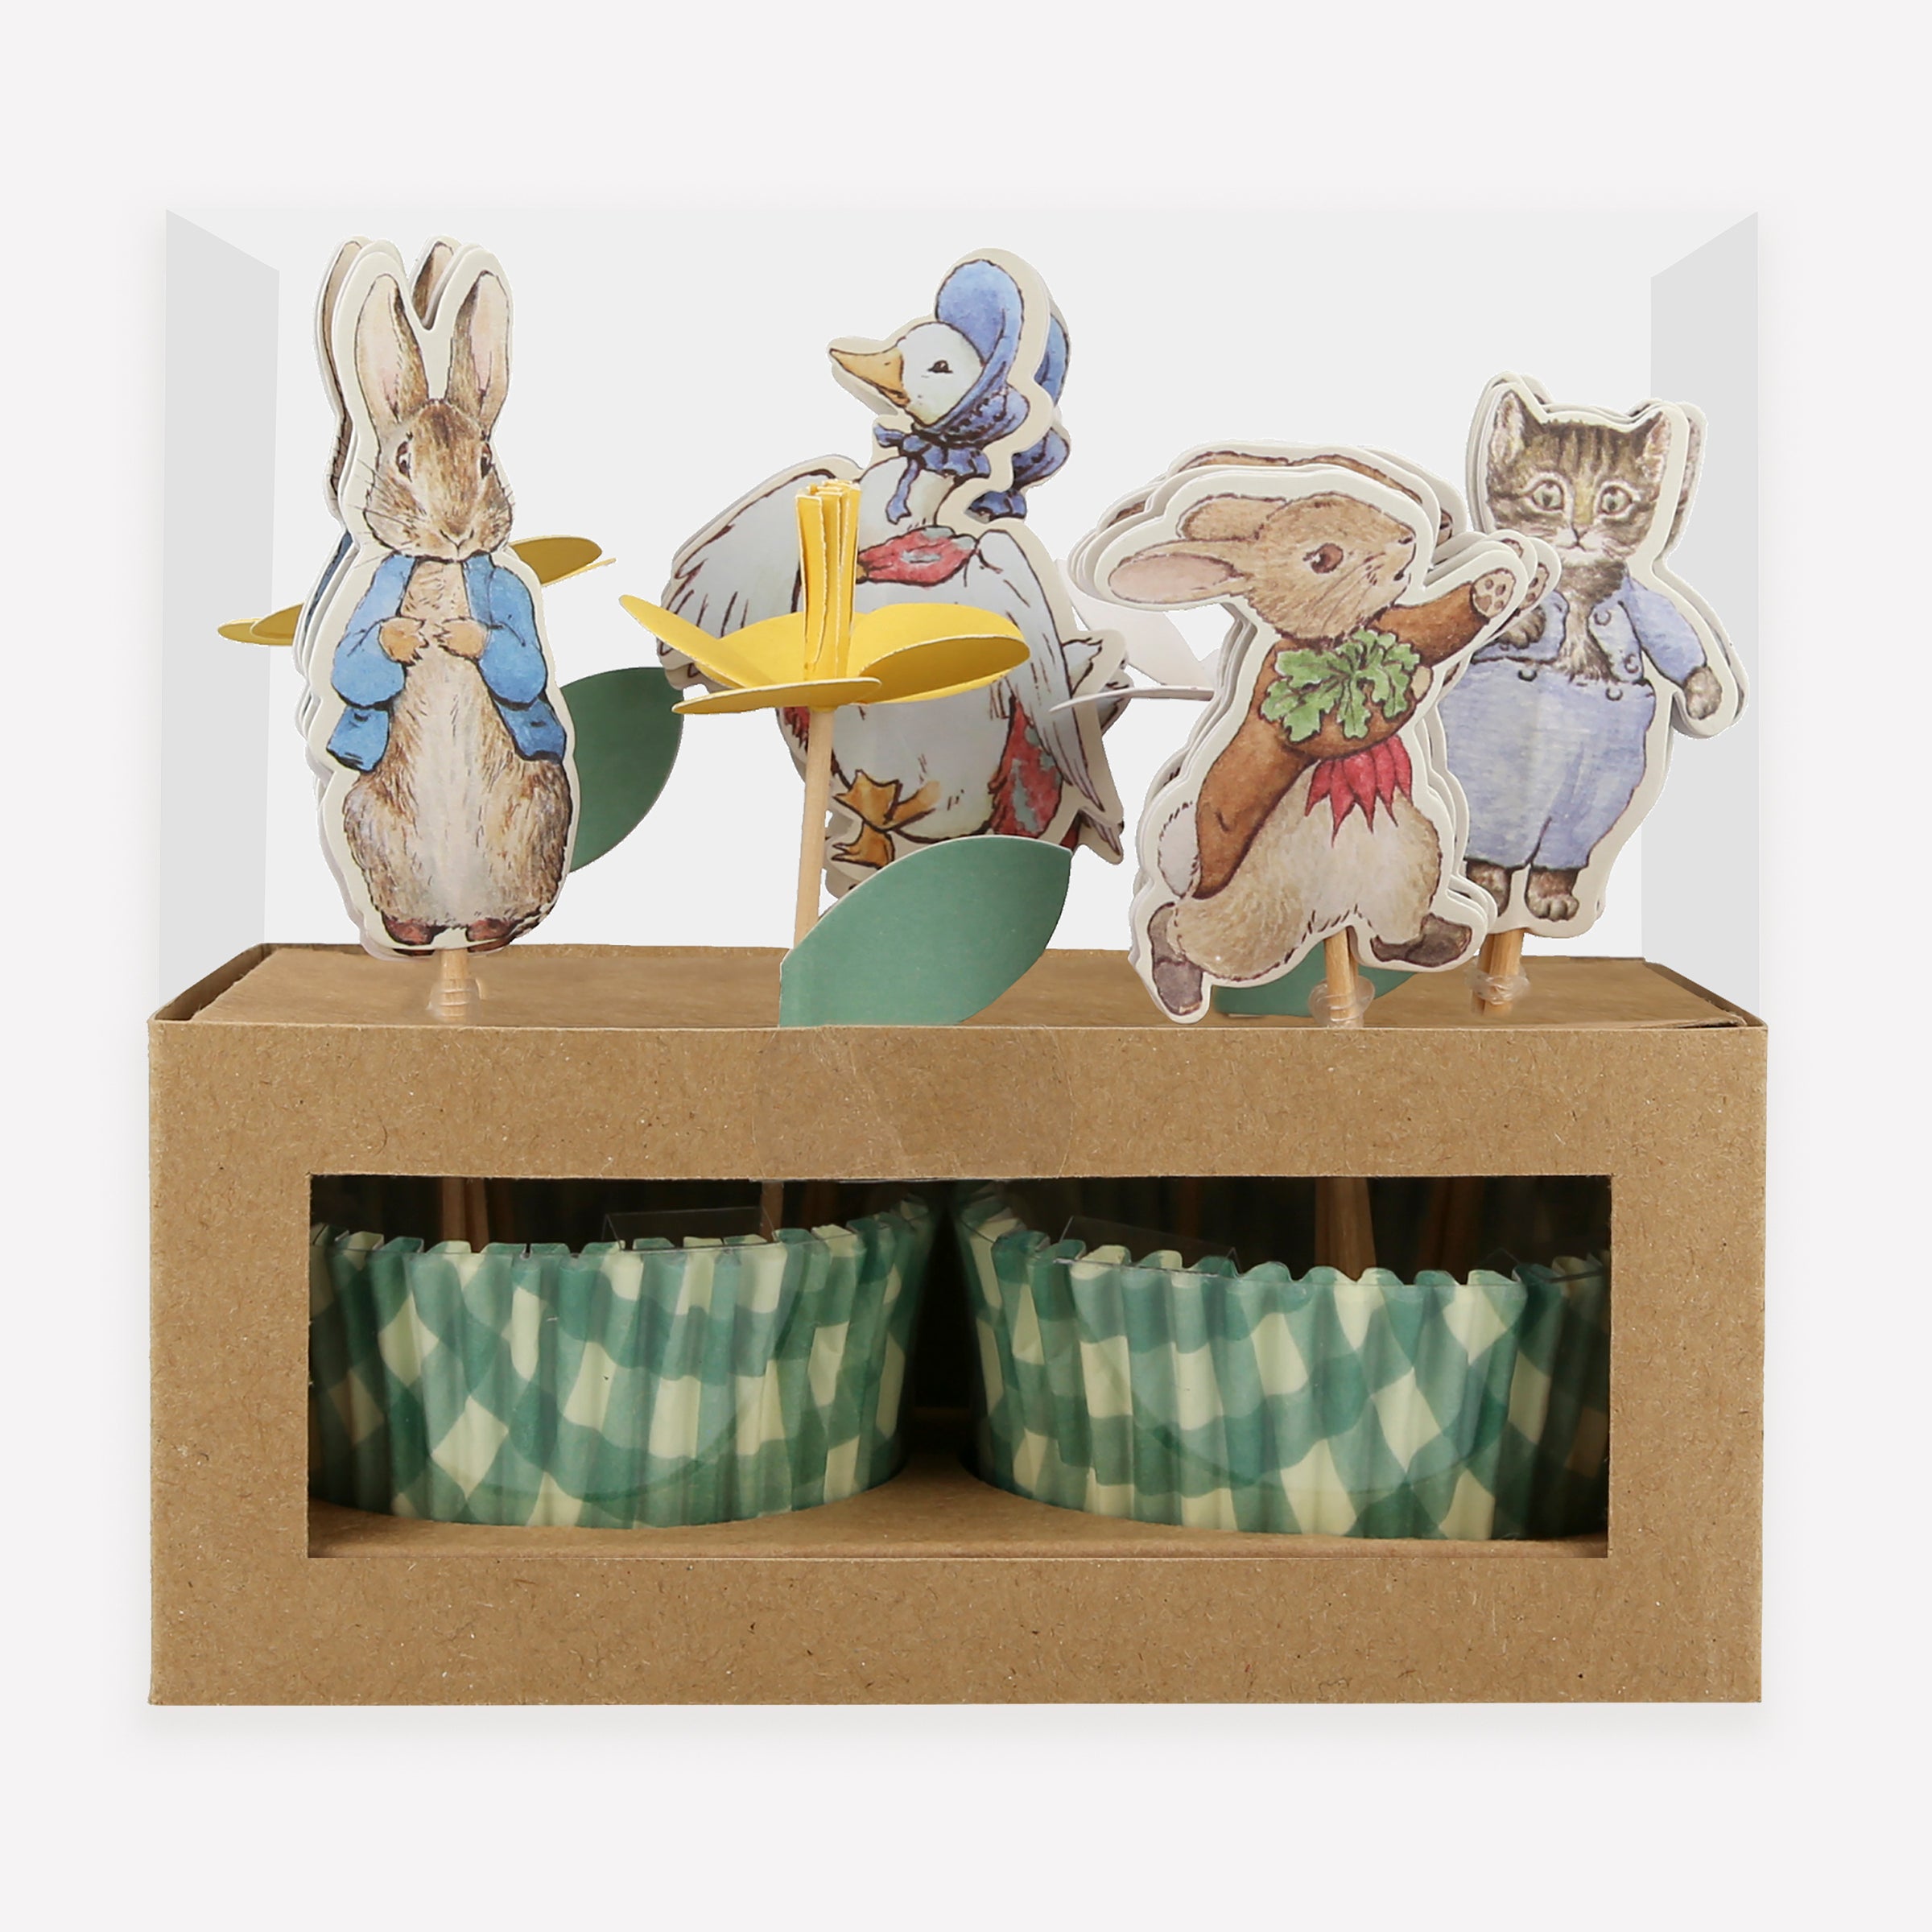 Our cupcake decorating kit includes Peter Rabbit and frienda cupcake toppers and green gingham cupcake cases.